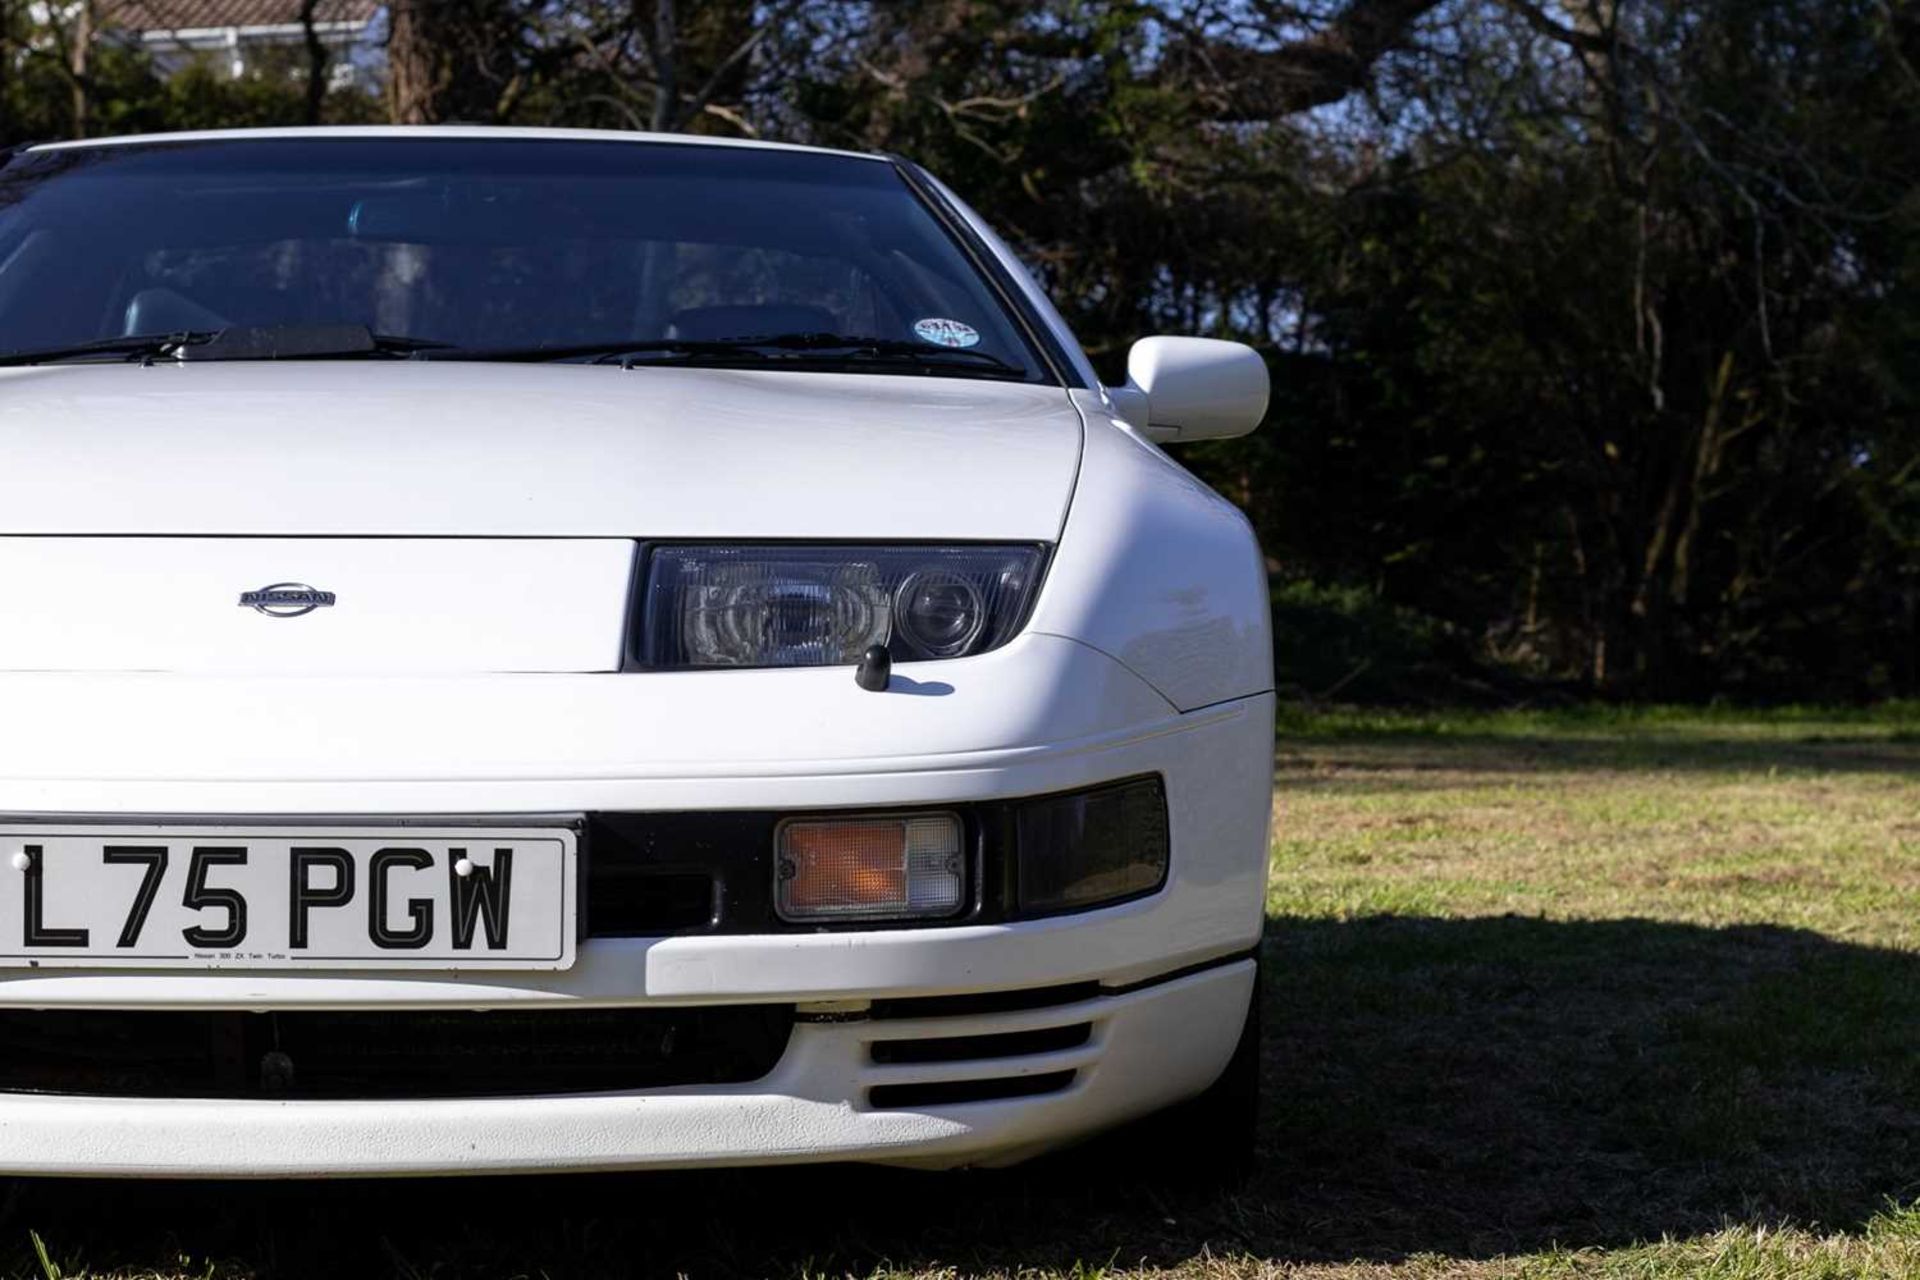 1990 Nissan 300ZX Turbo 2+2 Targa One of the last examples registered in the UK - Image 25 of 89